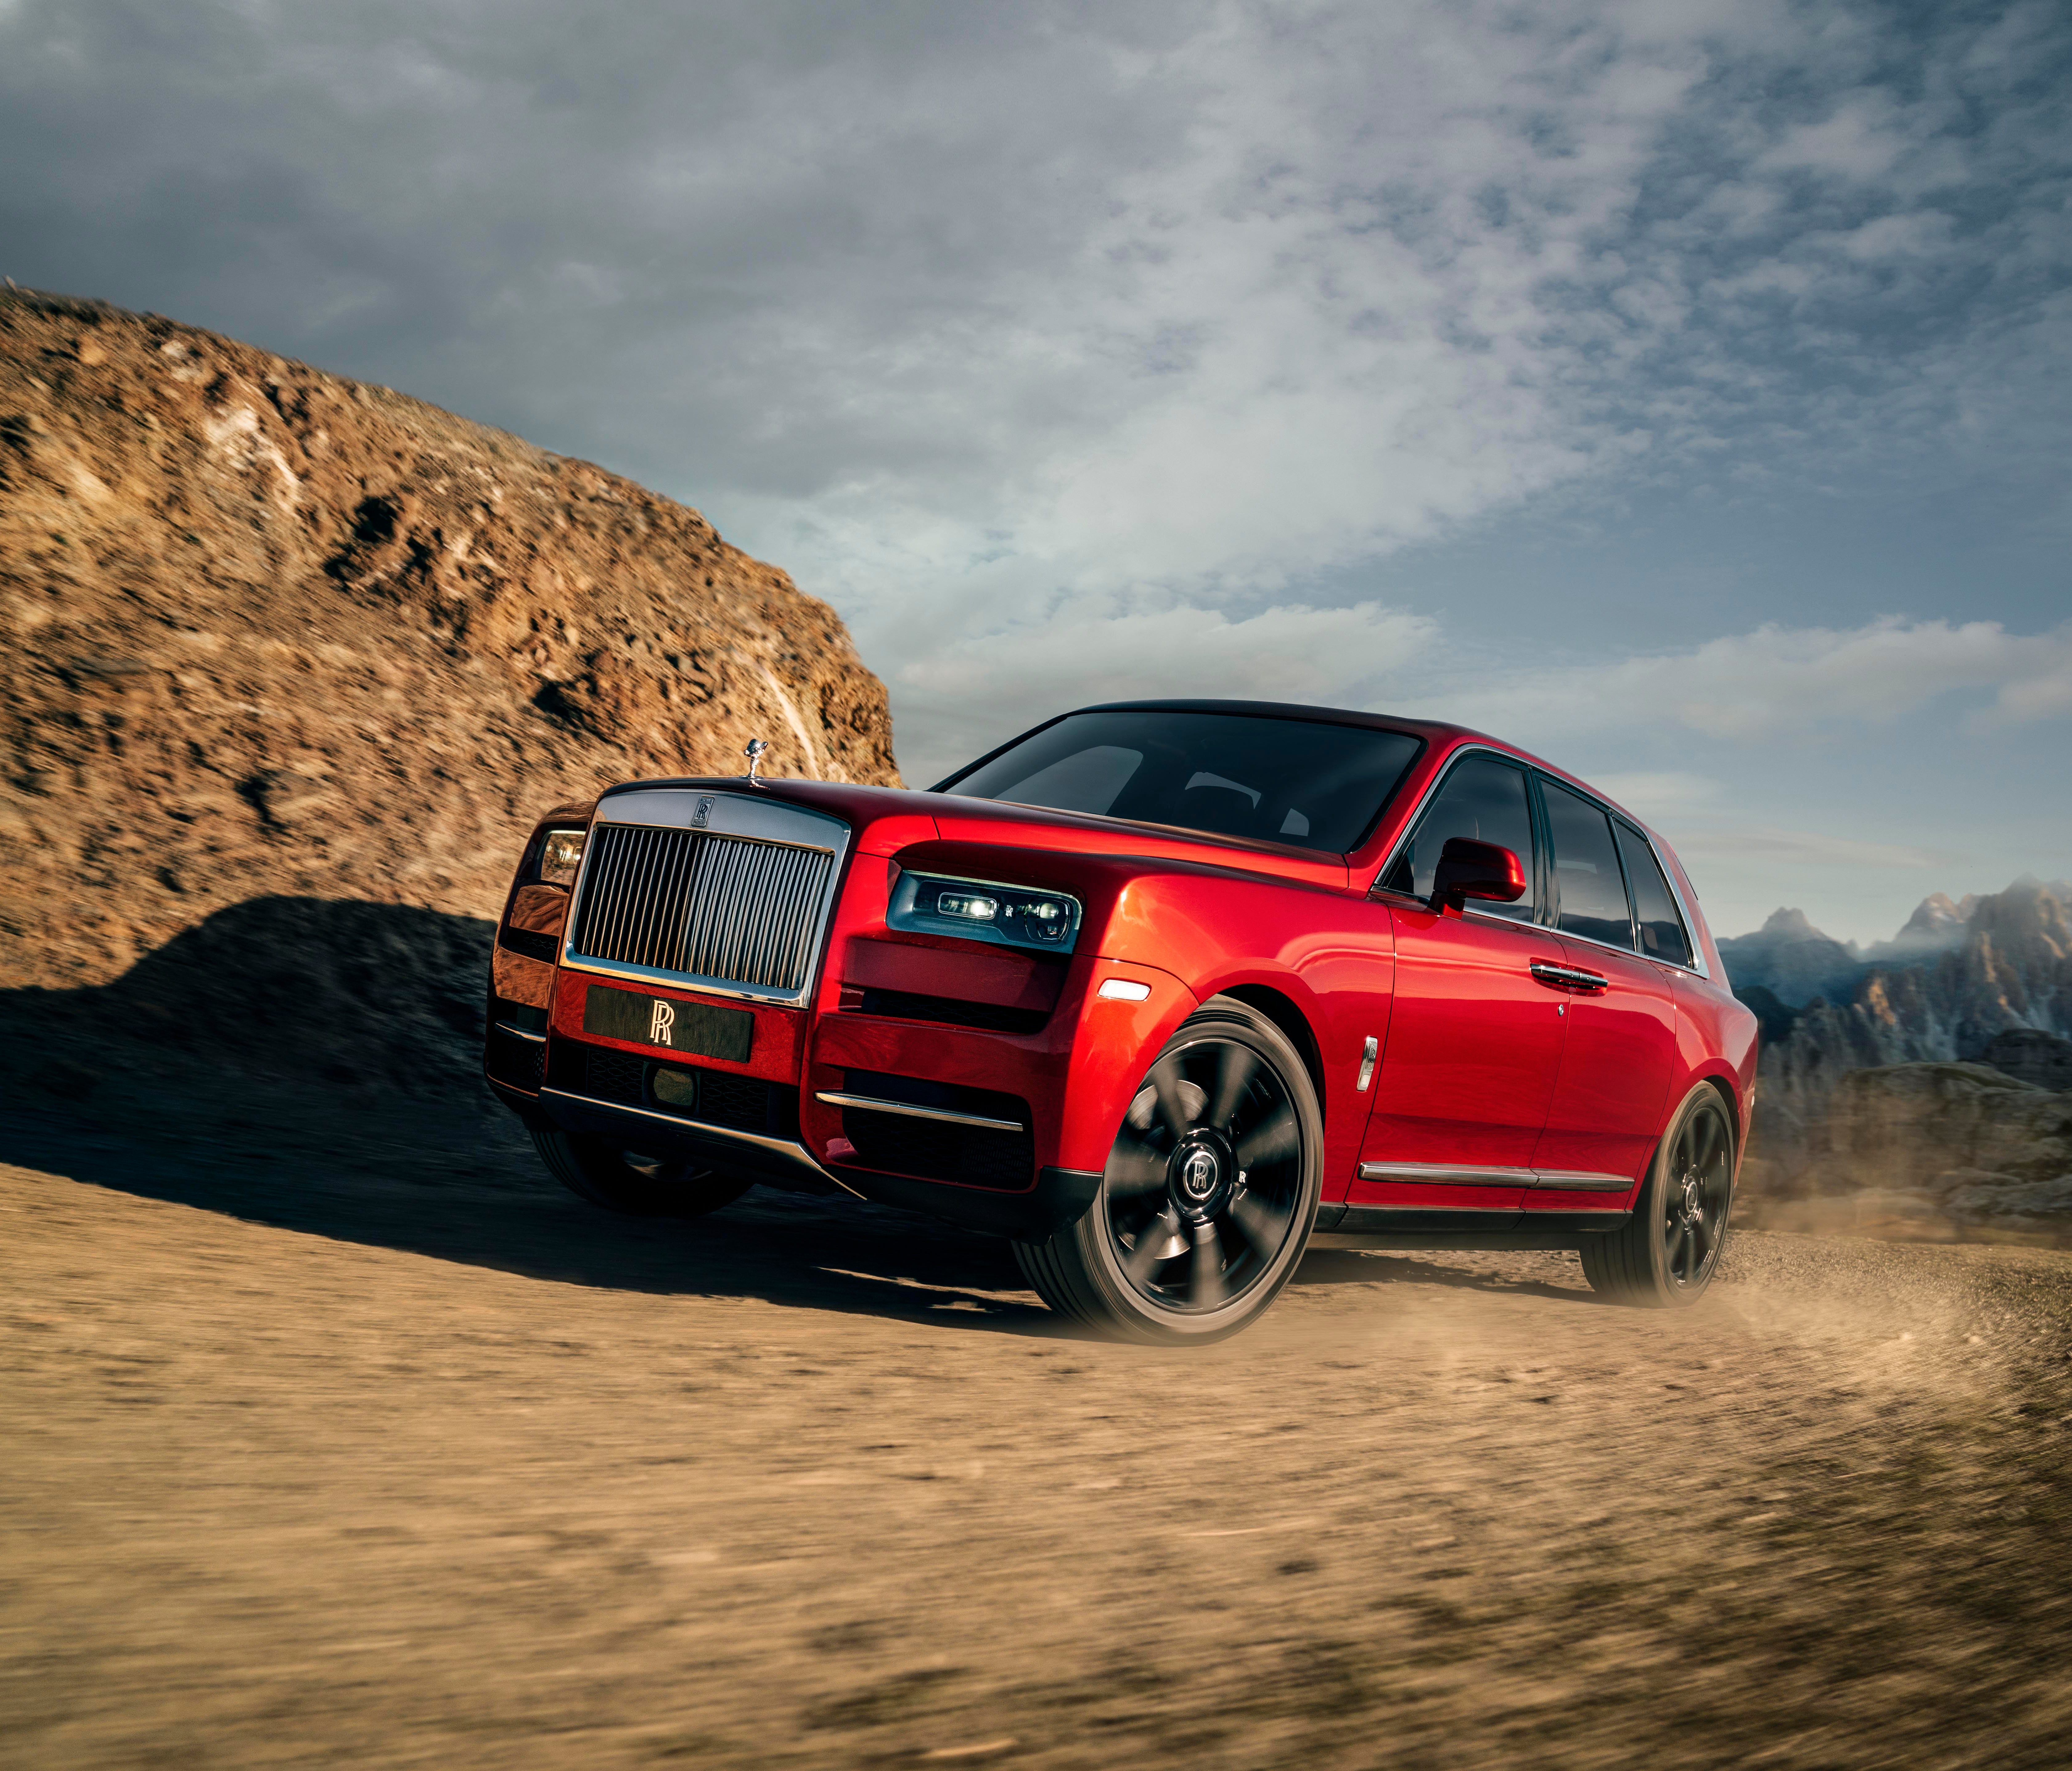 Rolls-Royce unveils the Cullinan SUV. It can go off road.